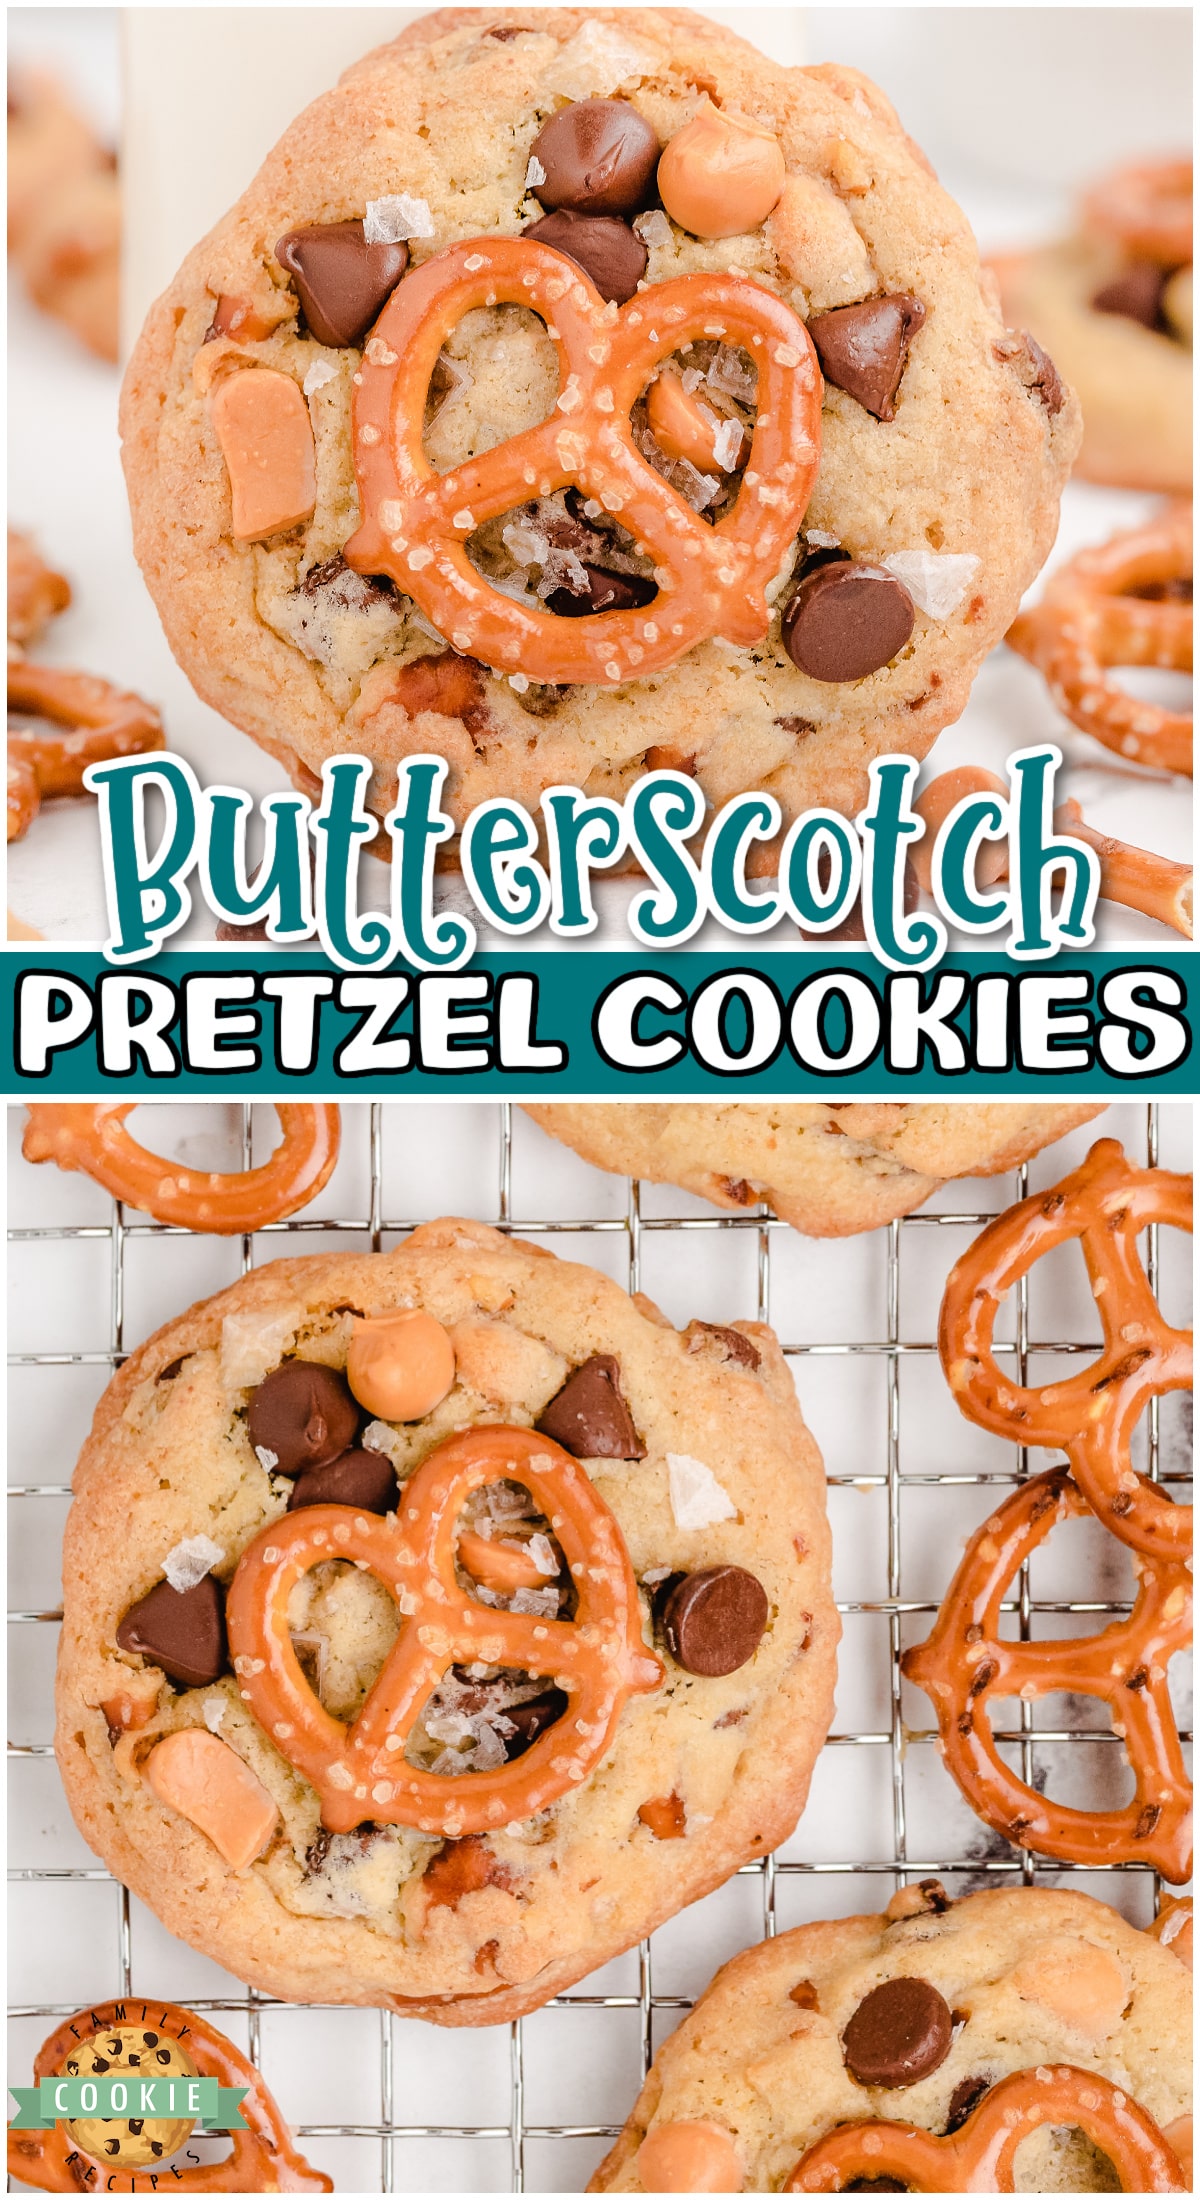 Sea Salt Butterscotch Pretzel Cookies are sweet and salty cookies that pack a crunch & a whole lot of flavor! With sea salt, pretzels, chocolate + butterscotch chips, these loaded cookies are amazing!